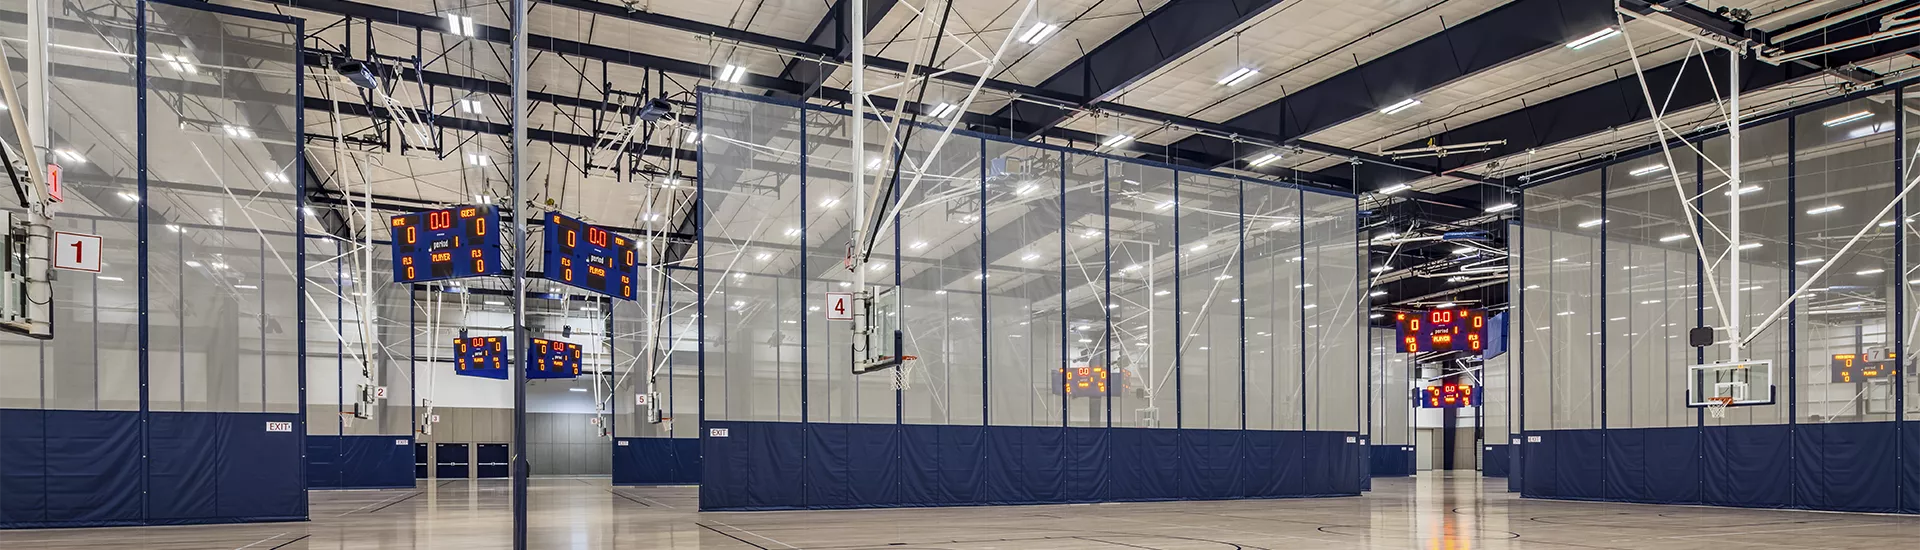 Gymnasium Dividers, Basketball Backstops with electric height adjusters, Overhead Volleyball Systems with judge's stands, scoreboard lifters, and Smart Gym Control System at the Roebbelen Center, Roseville, CA.